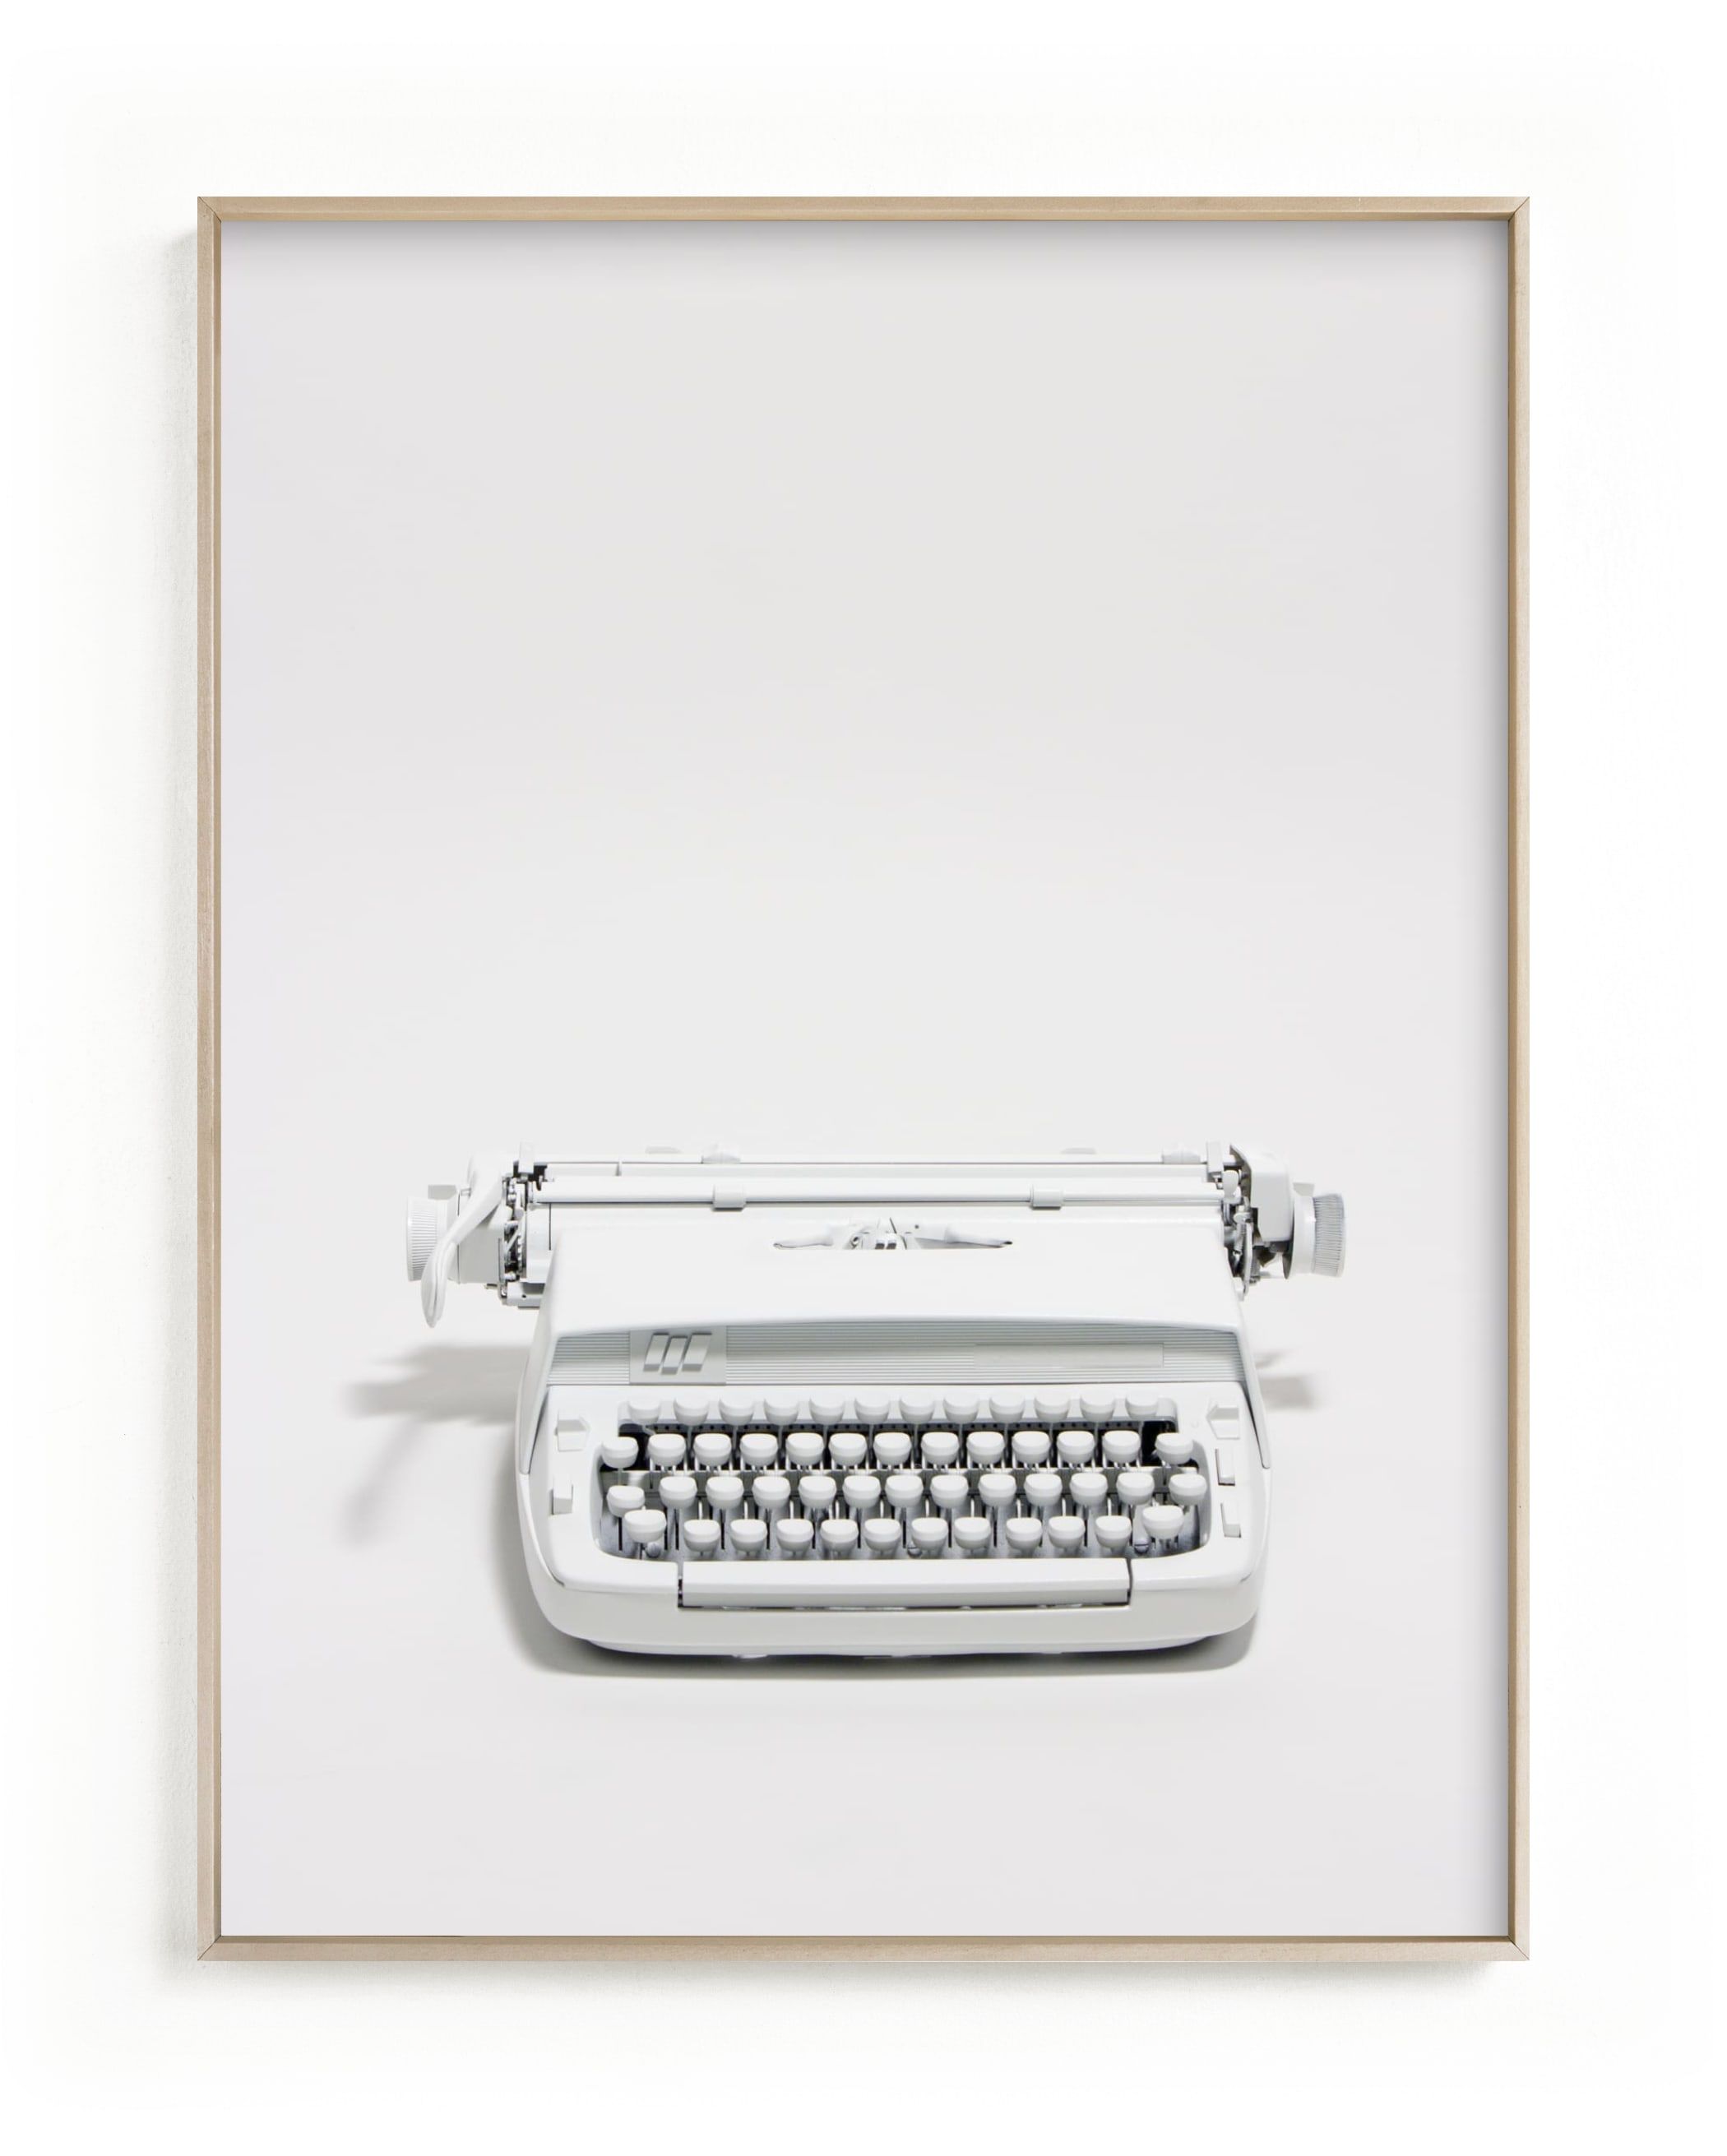 "The Typewriter" - Photography Limited Edition Art Print by Cristiane. | Minted